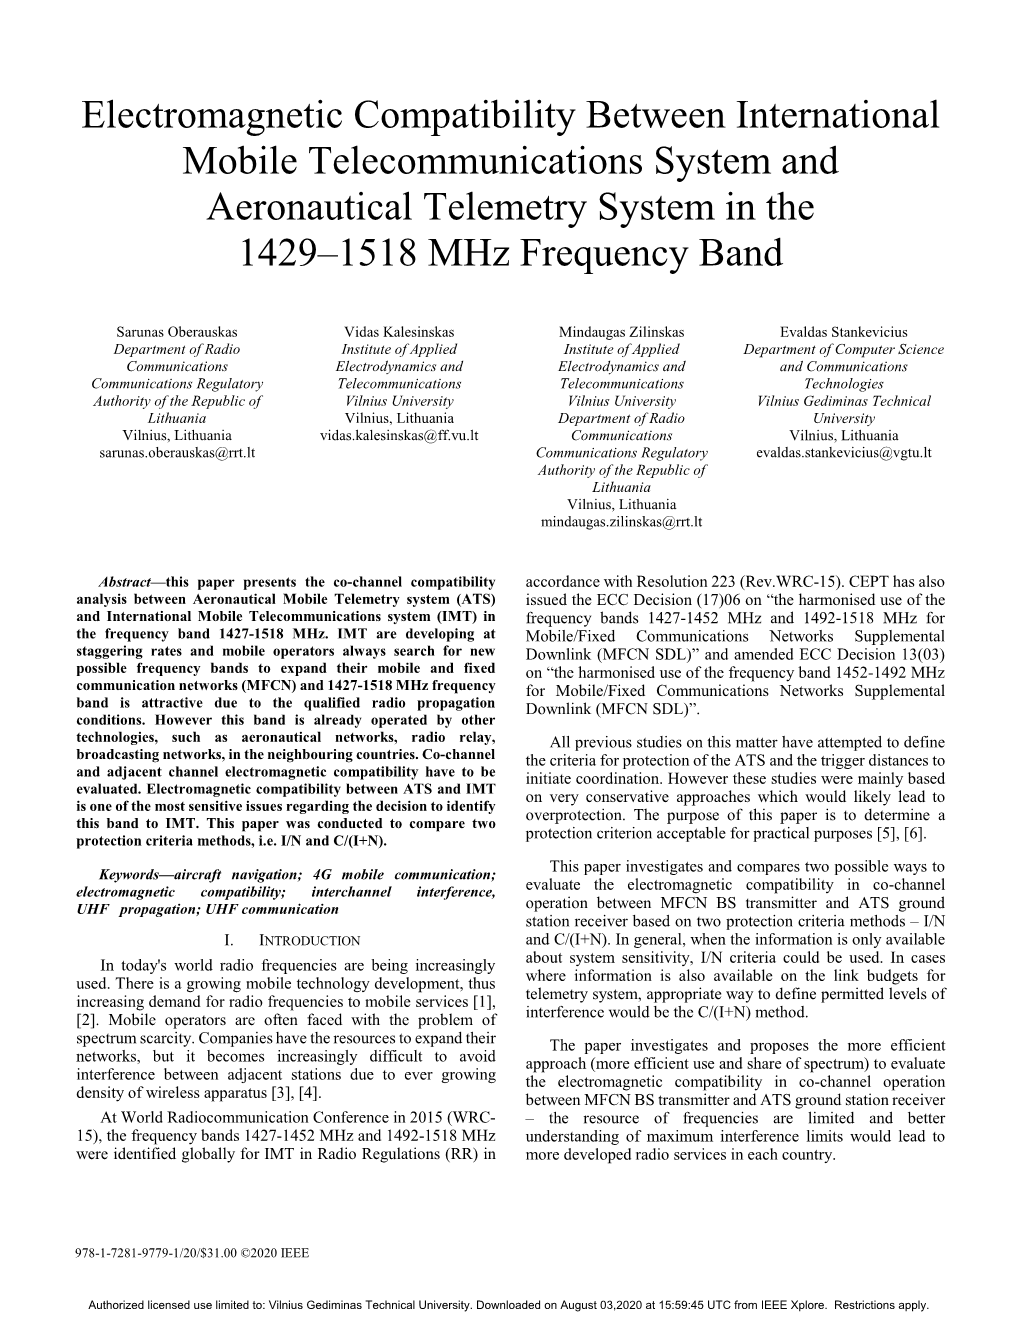 Electromagnetic Compatibility Between International Mobile Telecommunications System and Aeronautical Telemetry System in the 1429–1518 Mhz Frequency Band